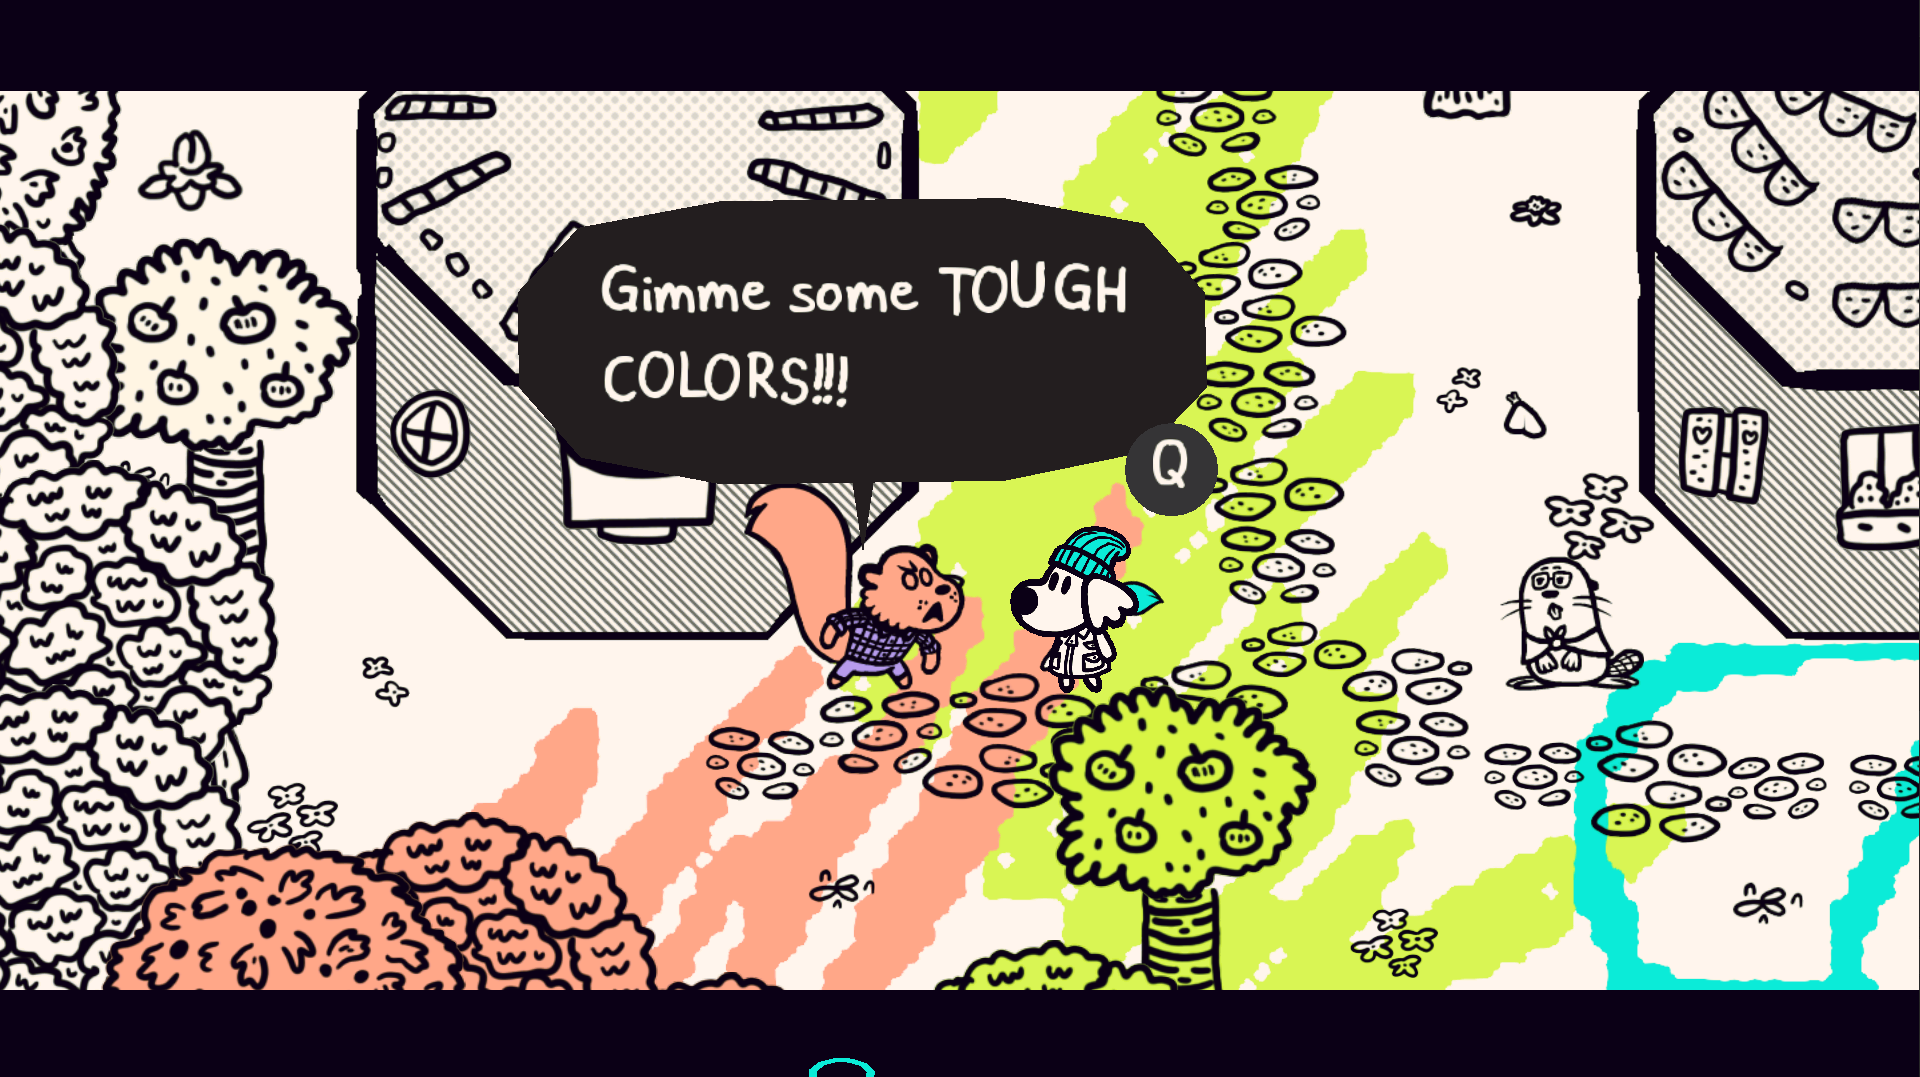 A screenshot from Chicory of a squirrel saying gimme some tough colors